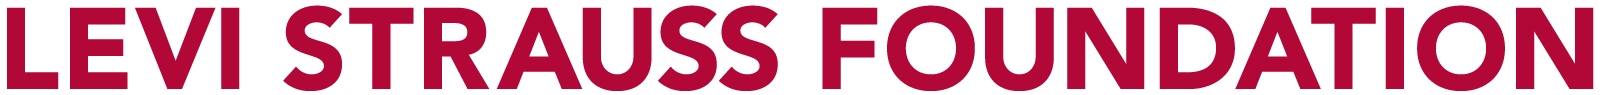 Levi Strauss Foundation Logo in all capital letters.